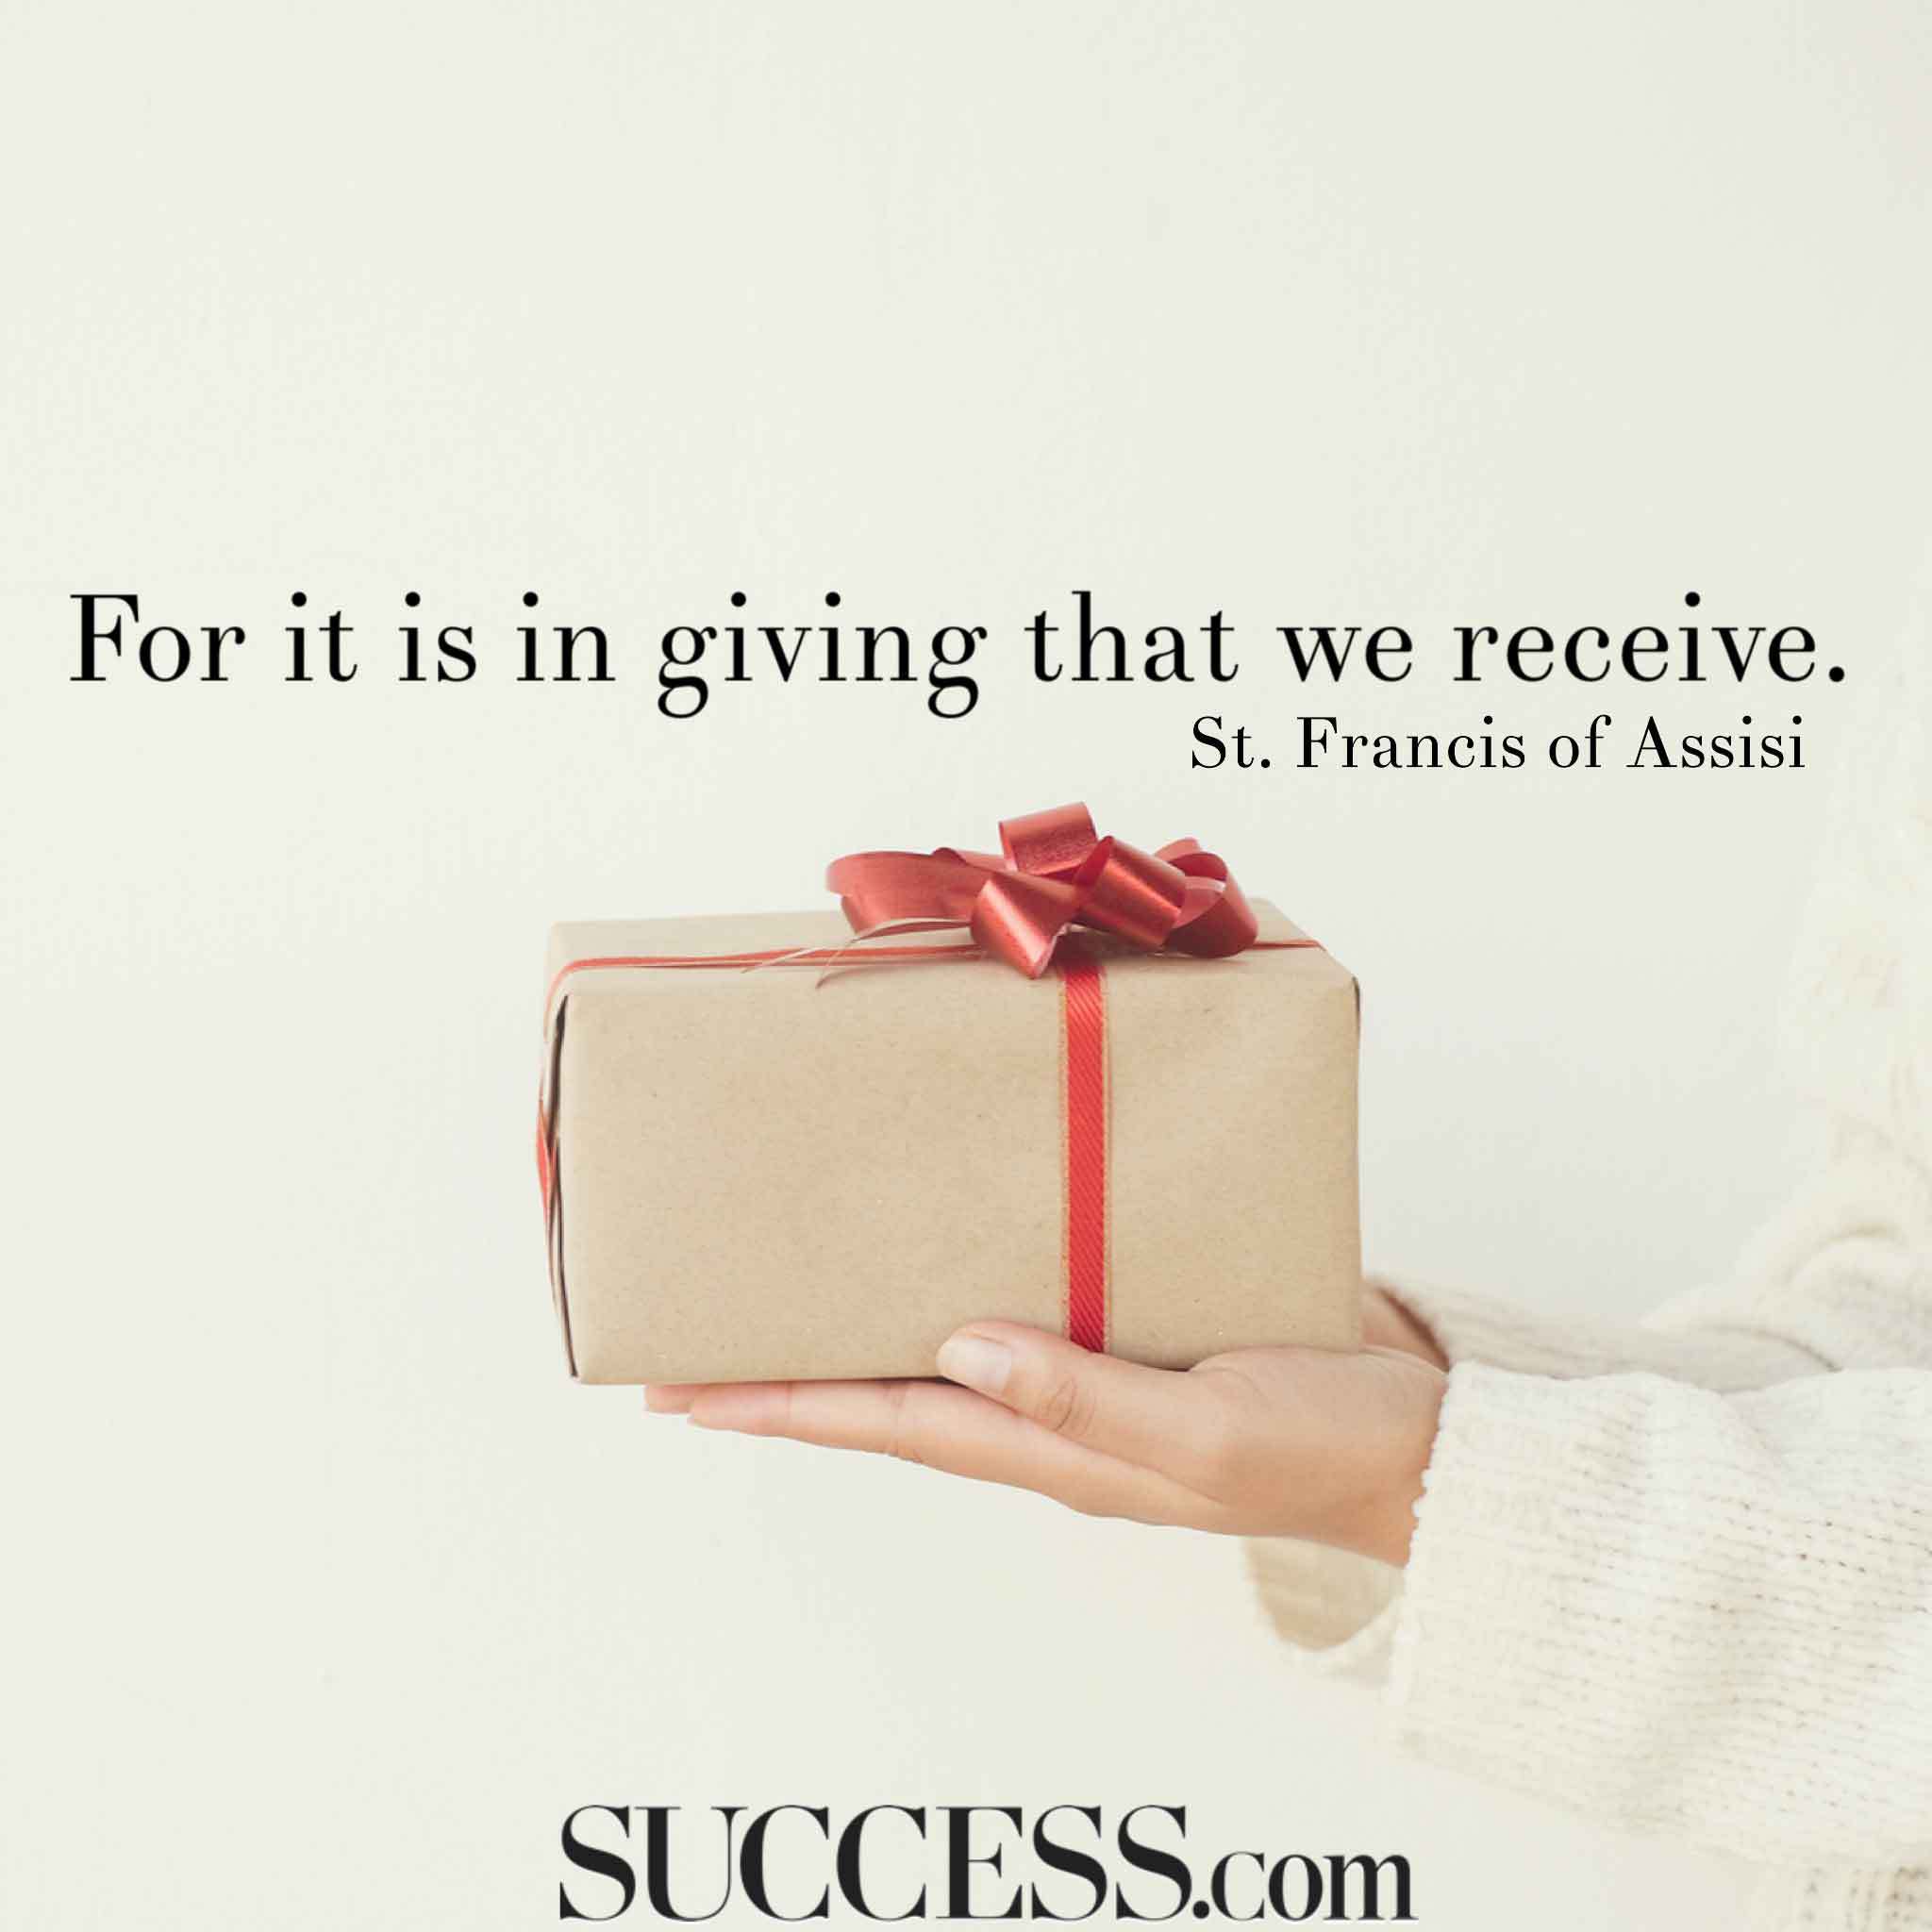 for it is in giving that we receive. st. francis of assisi